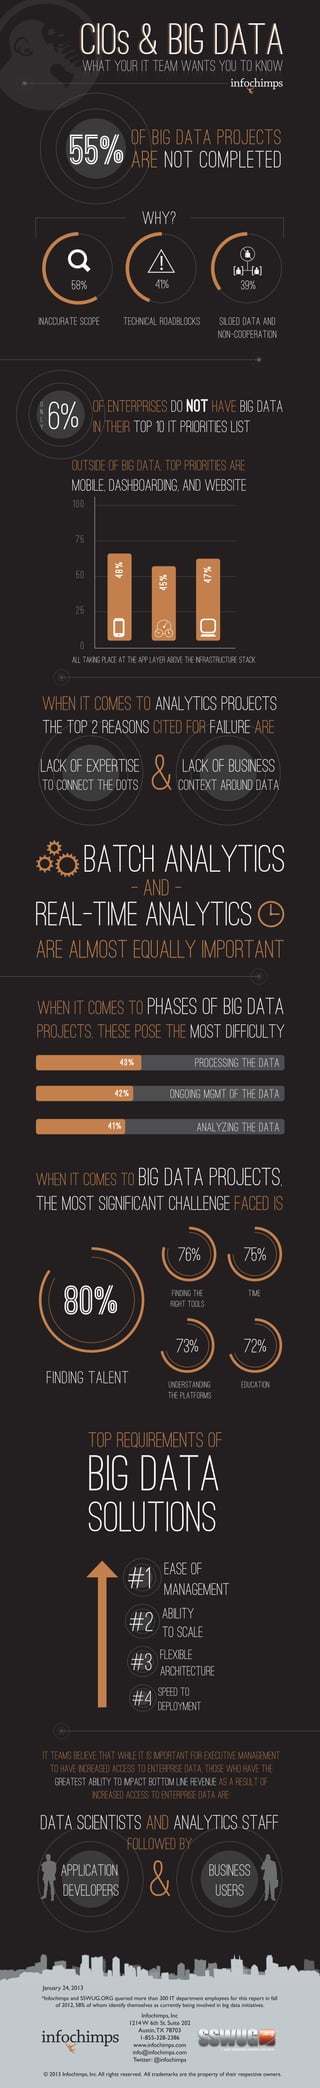 CIOS & BIG DATA
                     What Your IT Team Wants You to Know



                                          of Big Data projects
               55% are not completed
                                               WHY?

                                                      !                               [ ] [ ]
                58%                                 41%                                   39%

inaccurate scope                      technical roadblocks                      SILOED DATA AND
                                                                                NON-COOPERATION




O
                         of enterprises do not have Big Data
      6%
n
l
y
                         in their Top 10 IT Priorities list

                Outside of Big Data, top priorities are
                mobile, dashboarding, and website
                 100


                  75
                                   48%




                                                                         47%




                  50
                                                      45%




                  25


                    0
                all taking place at the app layer above the infrastructure stack




    When it comes to analytics projects
    the top 2 reasons cited for failure are

lack of expertise
    to connect the dots                            &            lack of business
                                                               context around data




                       batch analytics
                                          - and -
Real-time analytics
are almost equally important

When it comes to phases of big data
projects, these pose the most difficulty
                                     43%                              Processing the data

                                   42%                      ongoing mgmt of the data

                                41%                                   analyzing the data



When it comes to big data projects,
the most significant challenge faced is

                                                               76%                         75%

             80%                                            finding the
                                                            right tools
                                                                                             time




                                                              73%                          72%
      finding talent                                        understanding                 education
                                                            the platforms




                        Top requirements of
                        big data
                        solutions
                                                          Ease of
                                         #1               management
                                                       Ability
                                         #2            to scale
                                                      Flexible
                                          #3          architecture
                                                      Speed to
                                          #4          Deployment



    IT teams believe that while it is important for Executive Management
       to have increased access to enterprise data, those who have the
        greatest ability to impact bottom line revenue as a result of
                   increased access to enterprise data are:

Data Scientists and Analytics Staff
                                         followed by
            Application
            Developers                            &                         Business
                                                                             Users




    January 24, 2013
    *Infochimps and SSWUG.ORG queried more than 300 IT department employees for this report in fall
          of 2012, 58% of whom identify themselves as currently being involved in big data initiatives.
                                              Infochimps, Inc
                                         1214 W 6th St. Suite 202
                                             Austin, TX 78703
                                             1-855-328-2386
                                          www.infochimps.com
                                          info@infochimps.com
                                          Twitter: @infochimps

    © 2013 Infochimps, Inc. All rights reserved. All trademarks are the property of their respective owners.
 